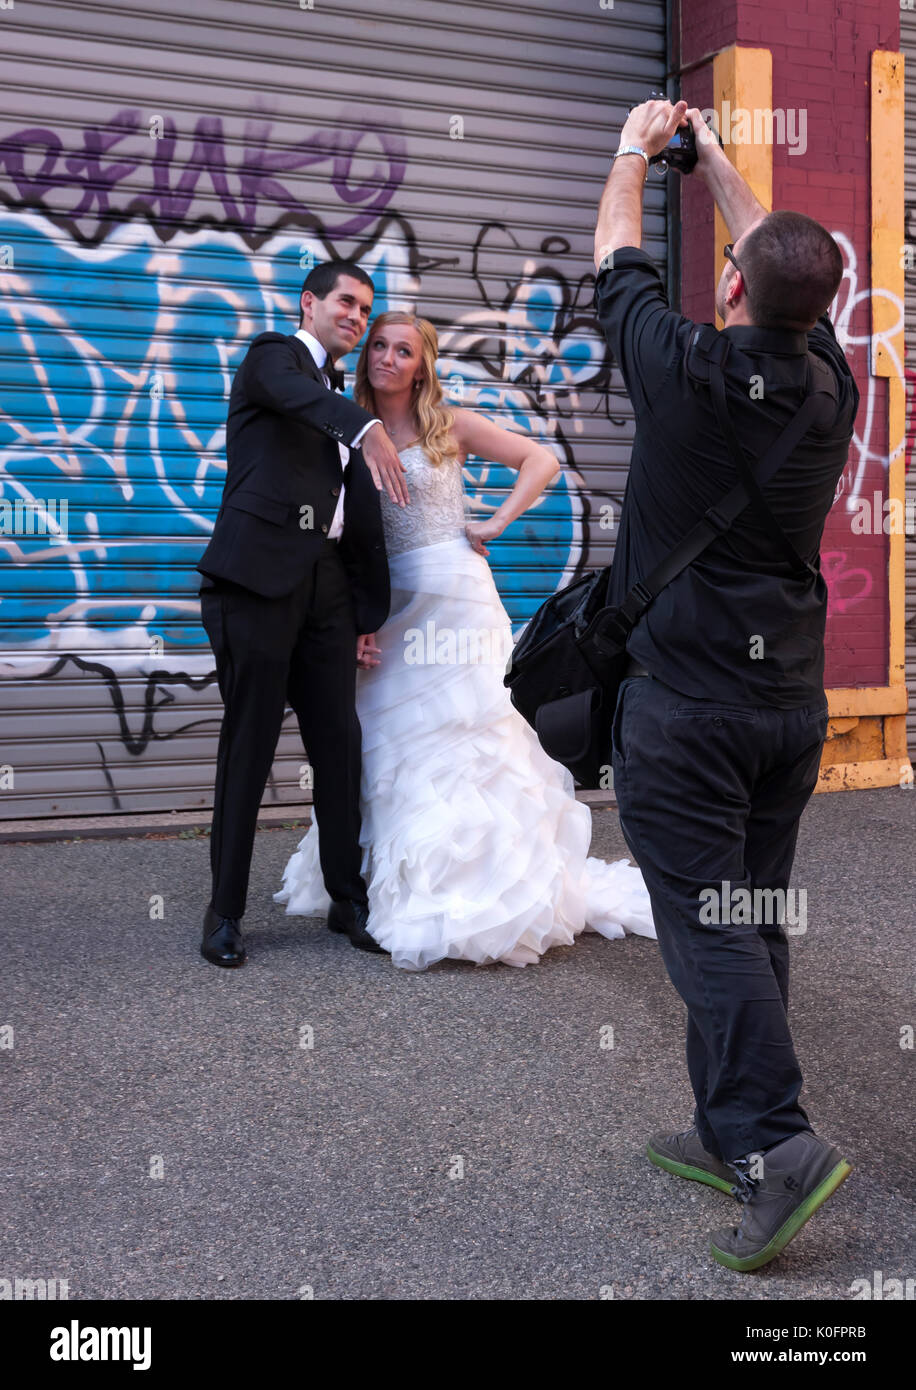 A wedding photographer captures the bride & posing and acting cool against a graffiti background. Stock Photo